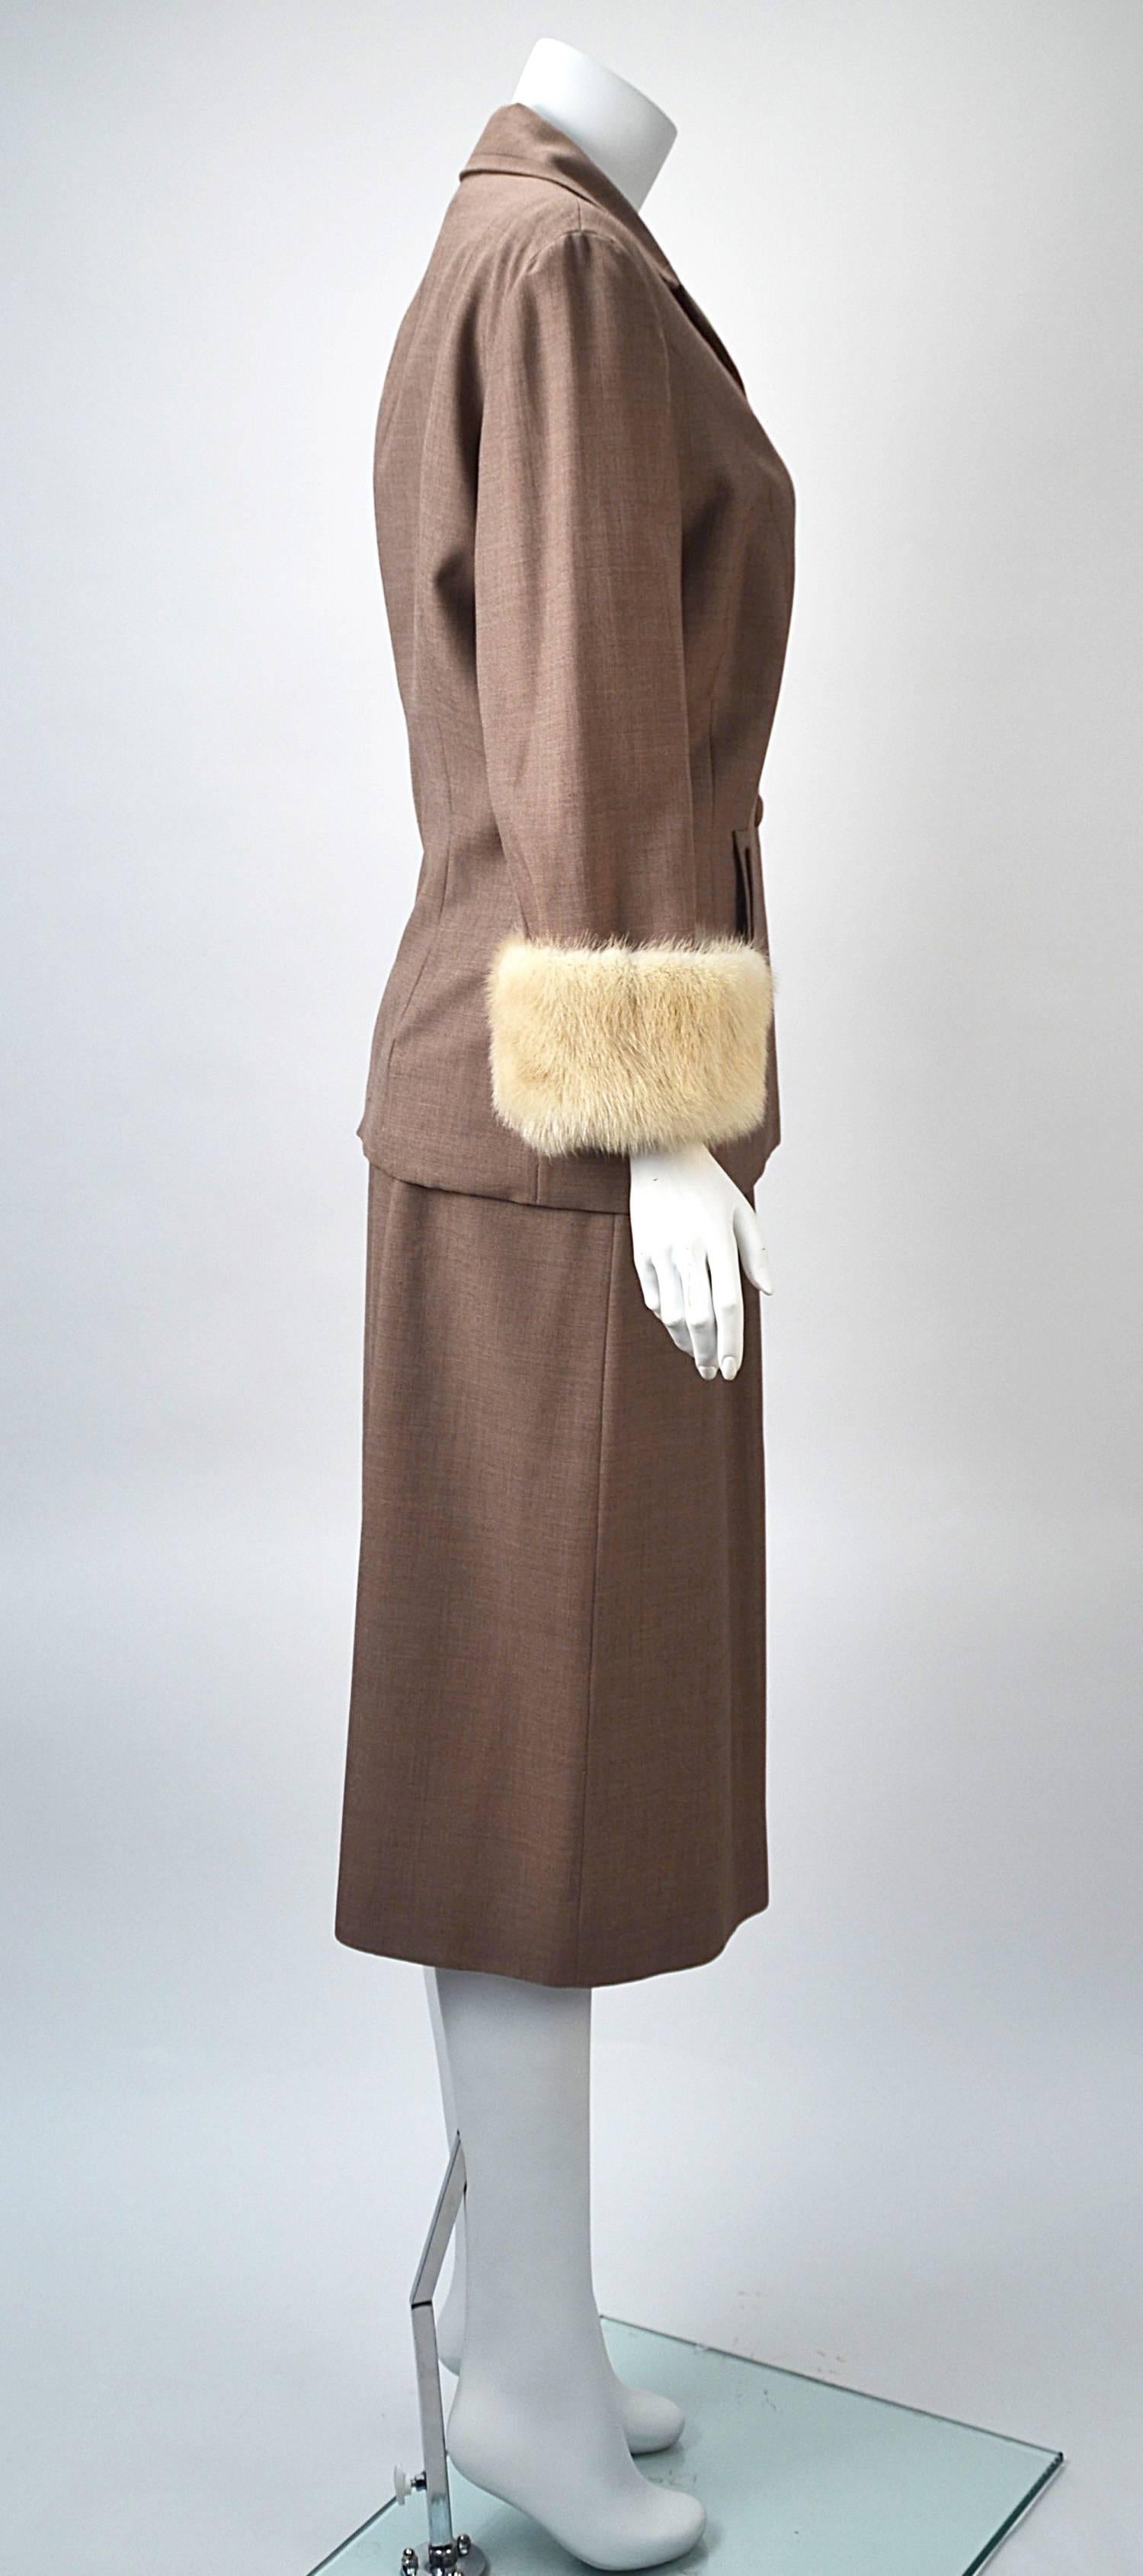 We don't often collect or sell suits, but we love this one!!!

Beautifully tailored hazelnut gabardine skirt suit with white mink cuffs on three quarter length sleeves from Neiman Marcus. Design details in this suit are reminiscent of the 1940's